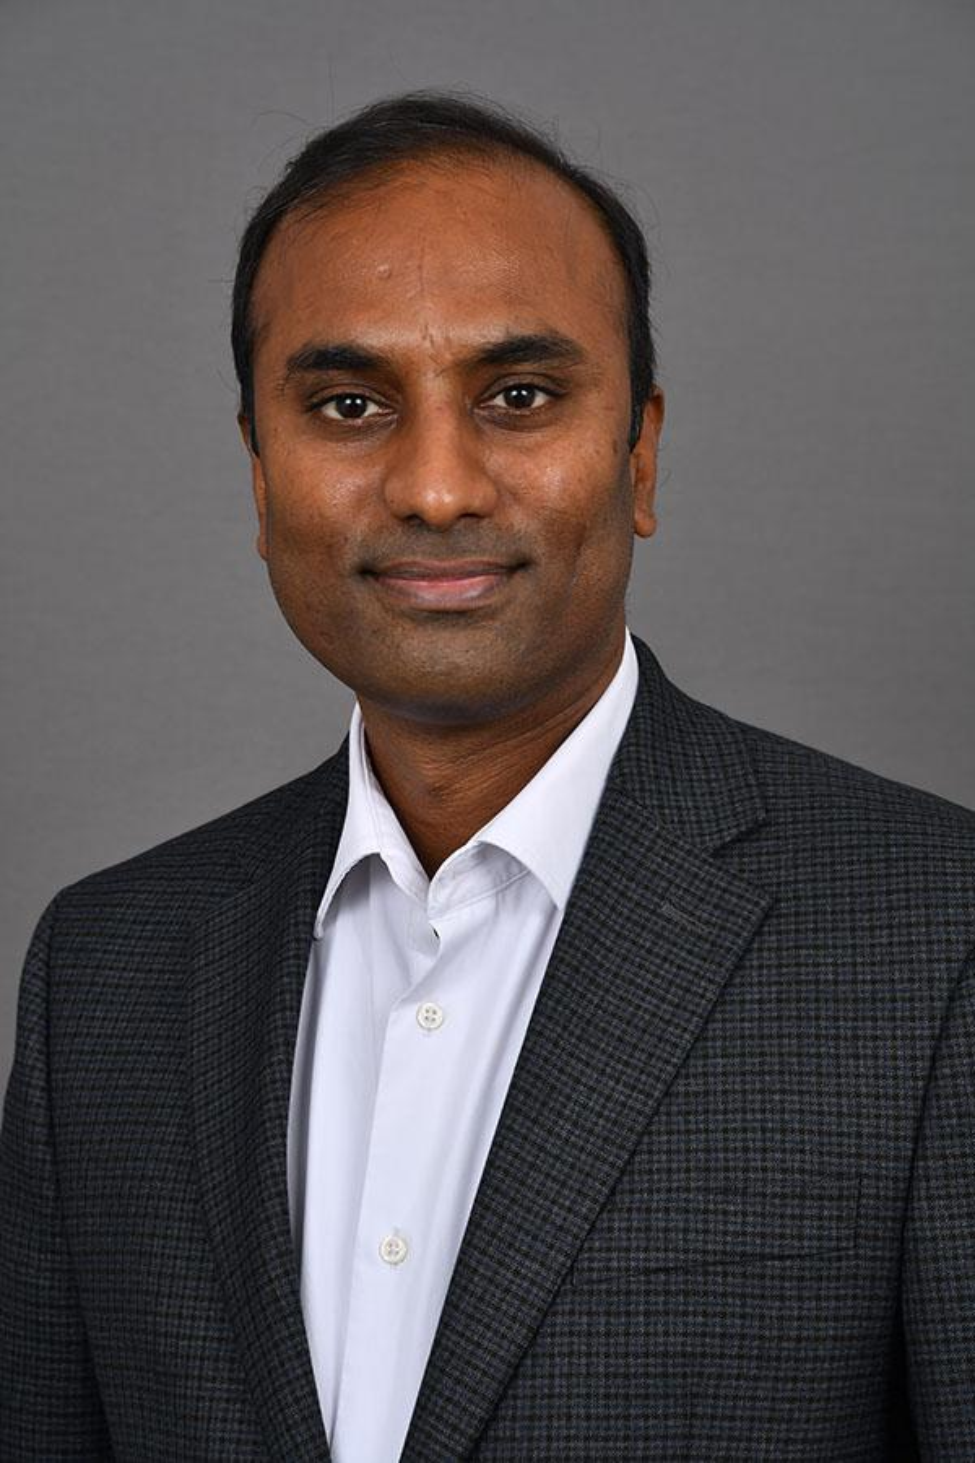 Sudhakar Selvaraj, MD, PhD, associate professor and director of the Depression Research Program at the Louis A. Faillace, MD, Department of Psychiatry and Behavioral Sciences with McGovern Medical School at UTHealth Houston. (Photo by UTHealth Houston)